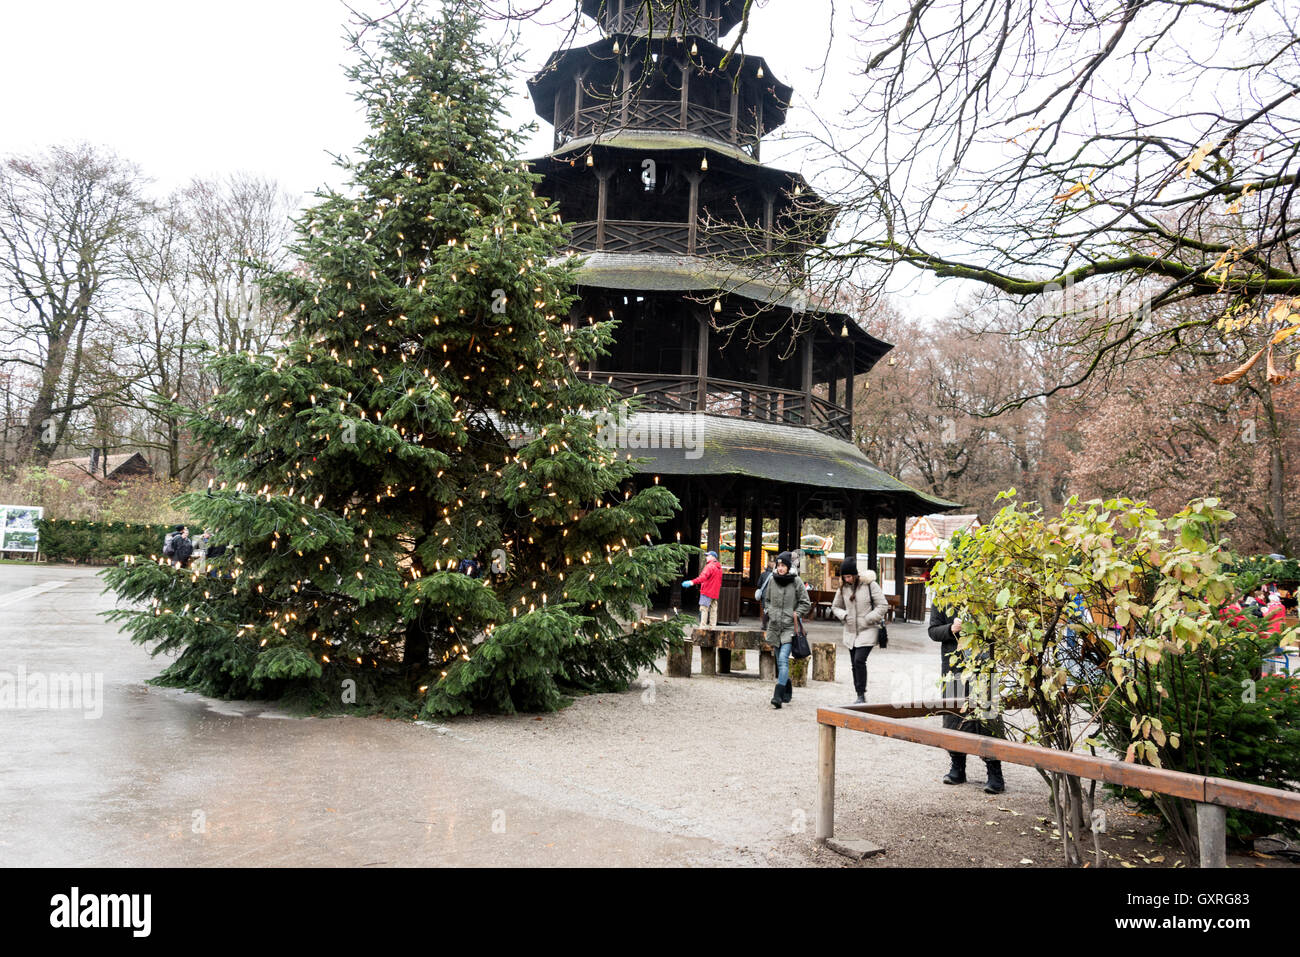 A tall Christmas tree next to the Chinese wooden tower at the English Gardens in Munich, Bavaria, Germany Stock Photo